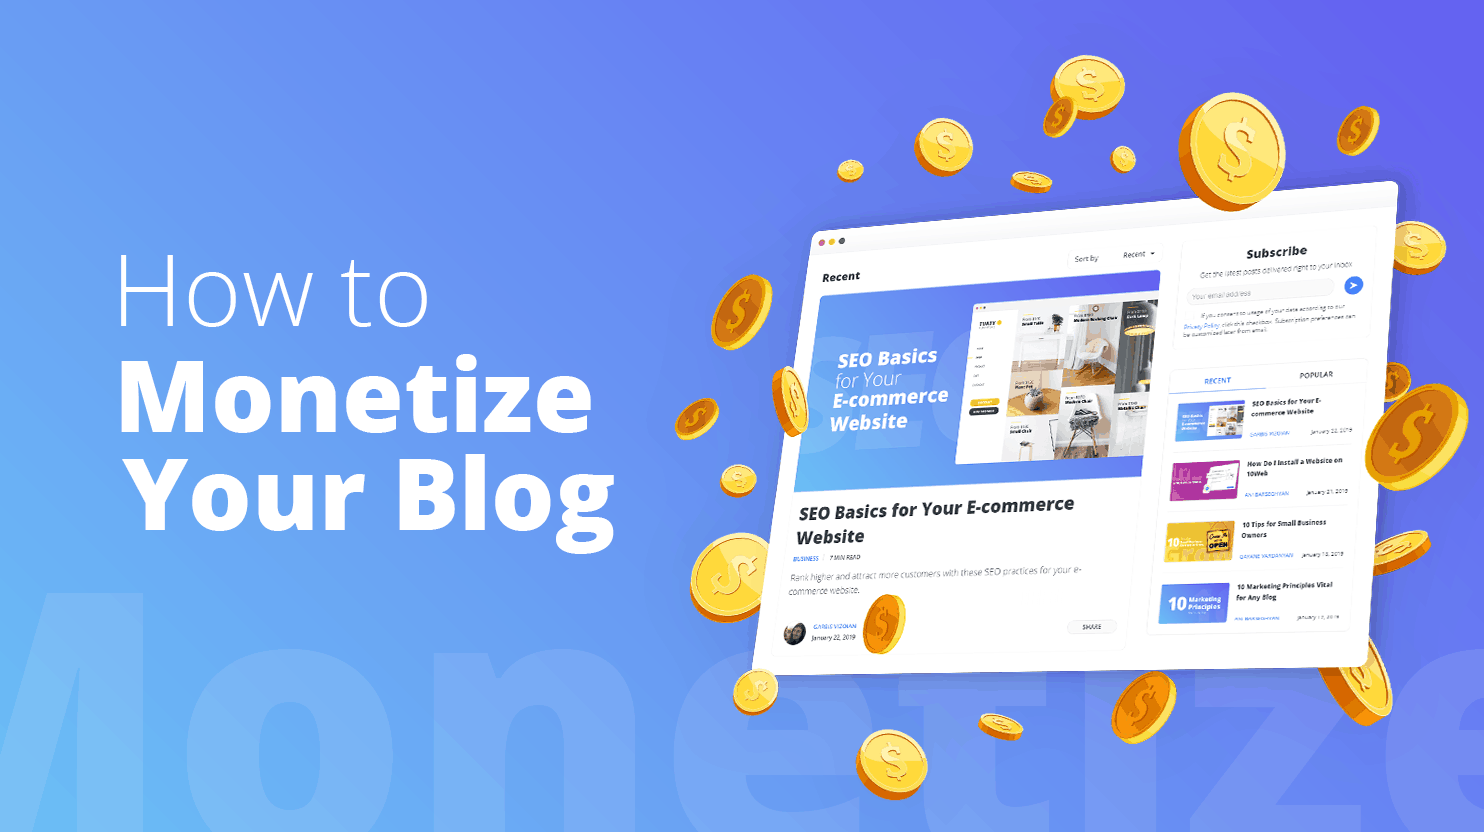 How To Monetize a Blog